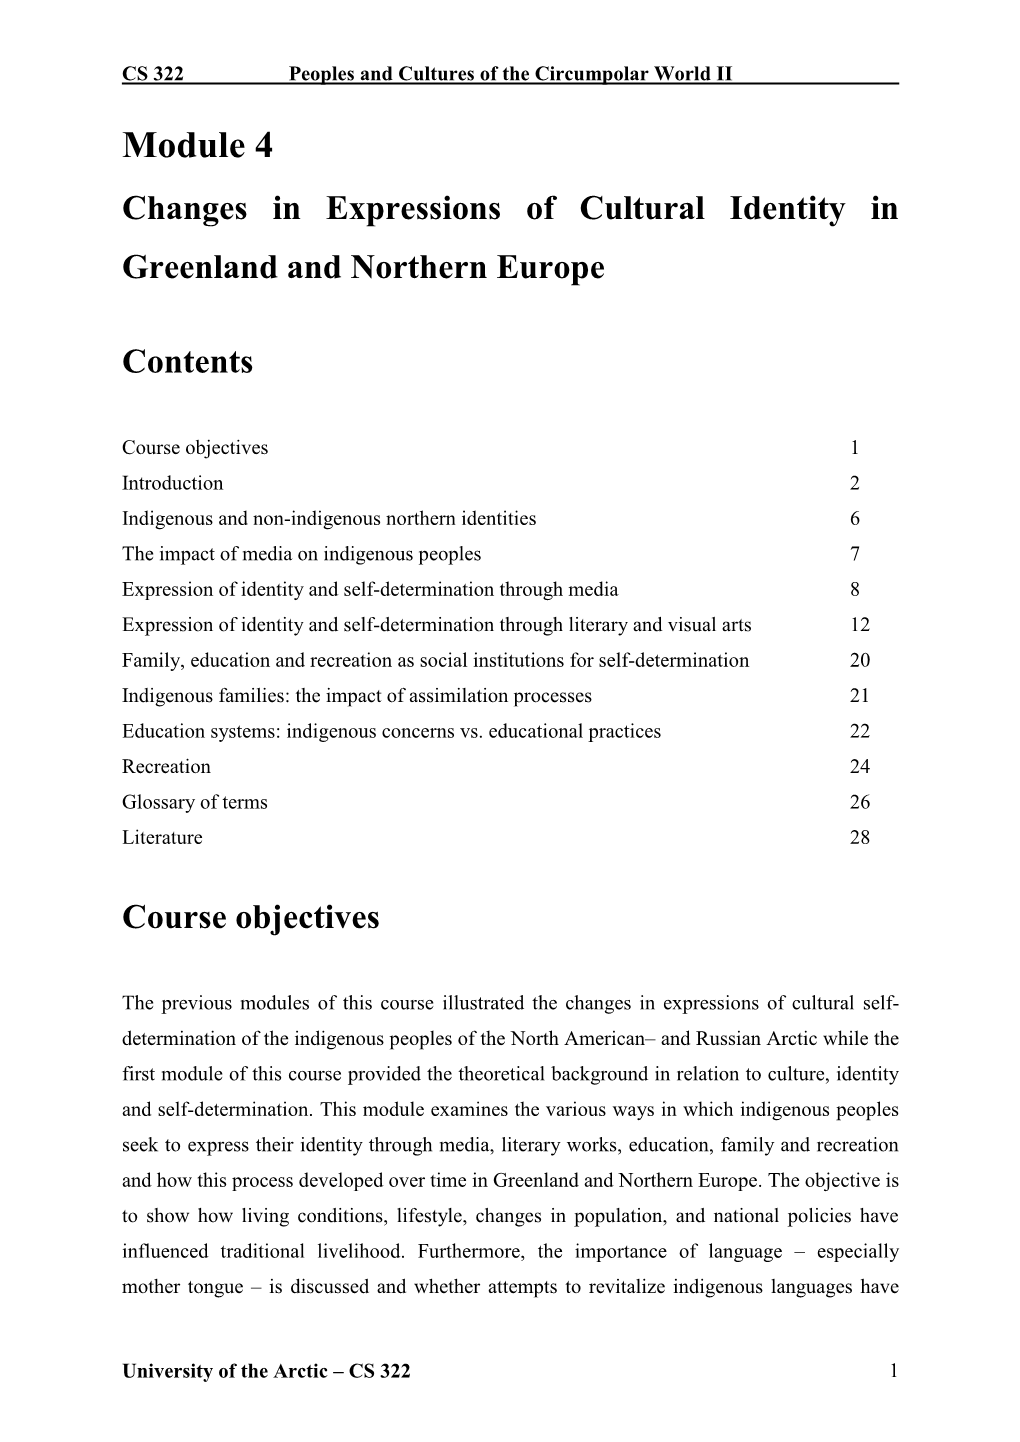 322-4-Cultural Identity in Northern Europe and Greenland